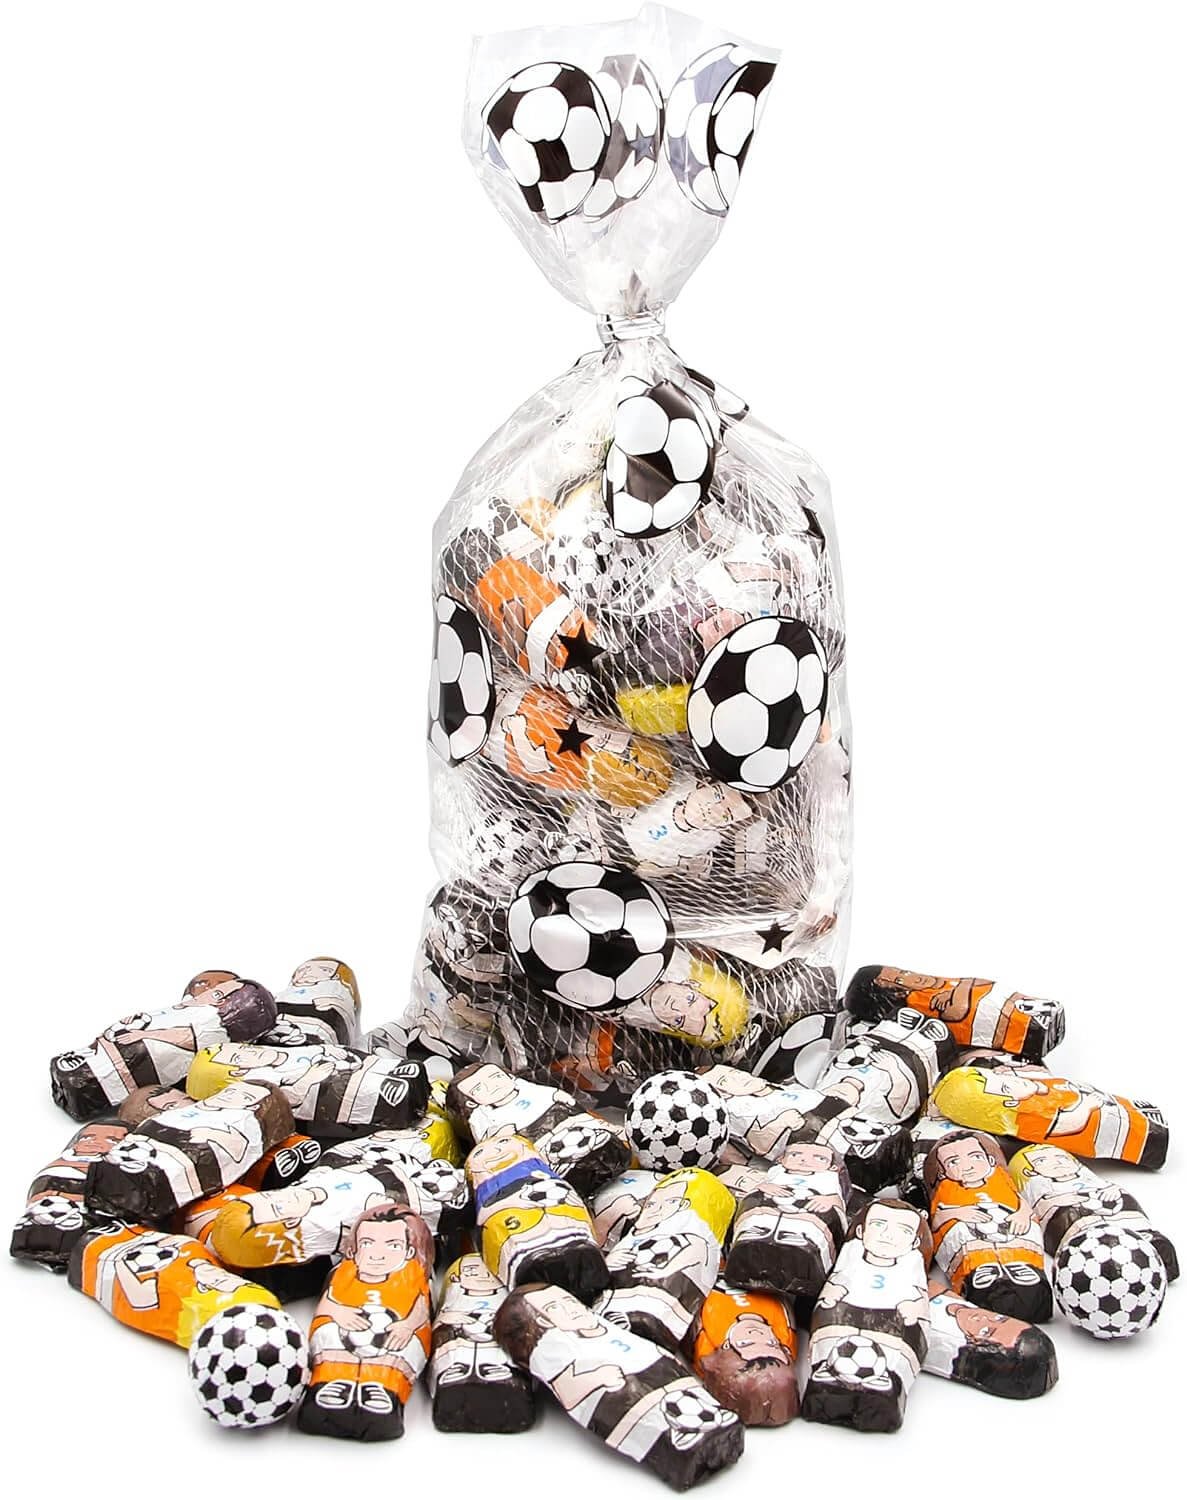 Chocolate footballs and players